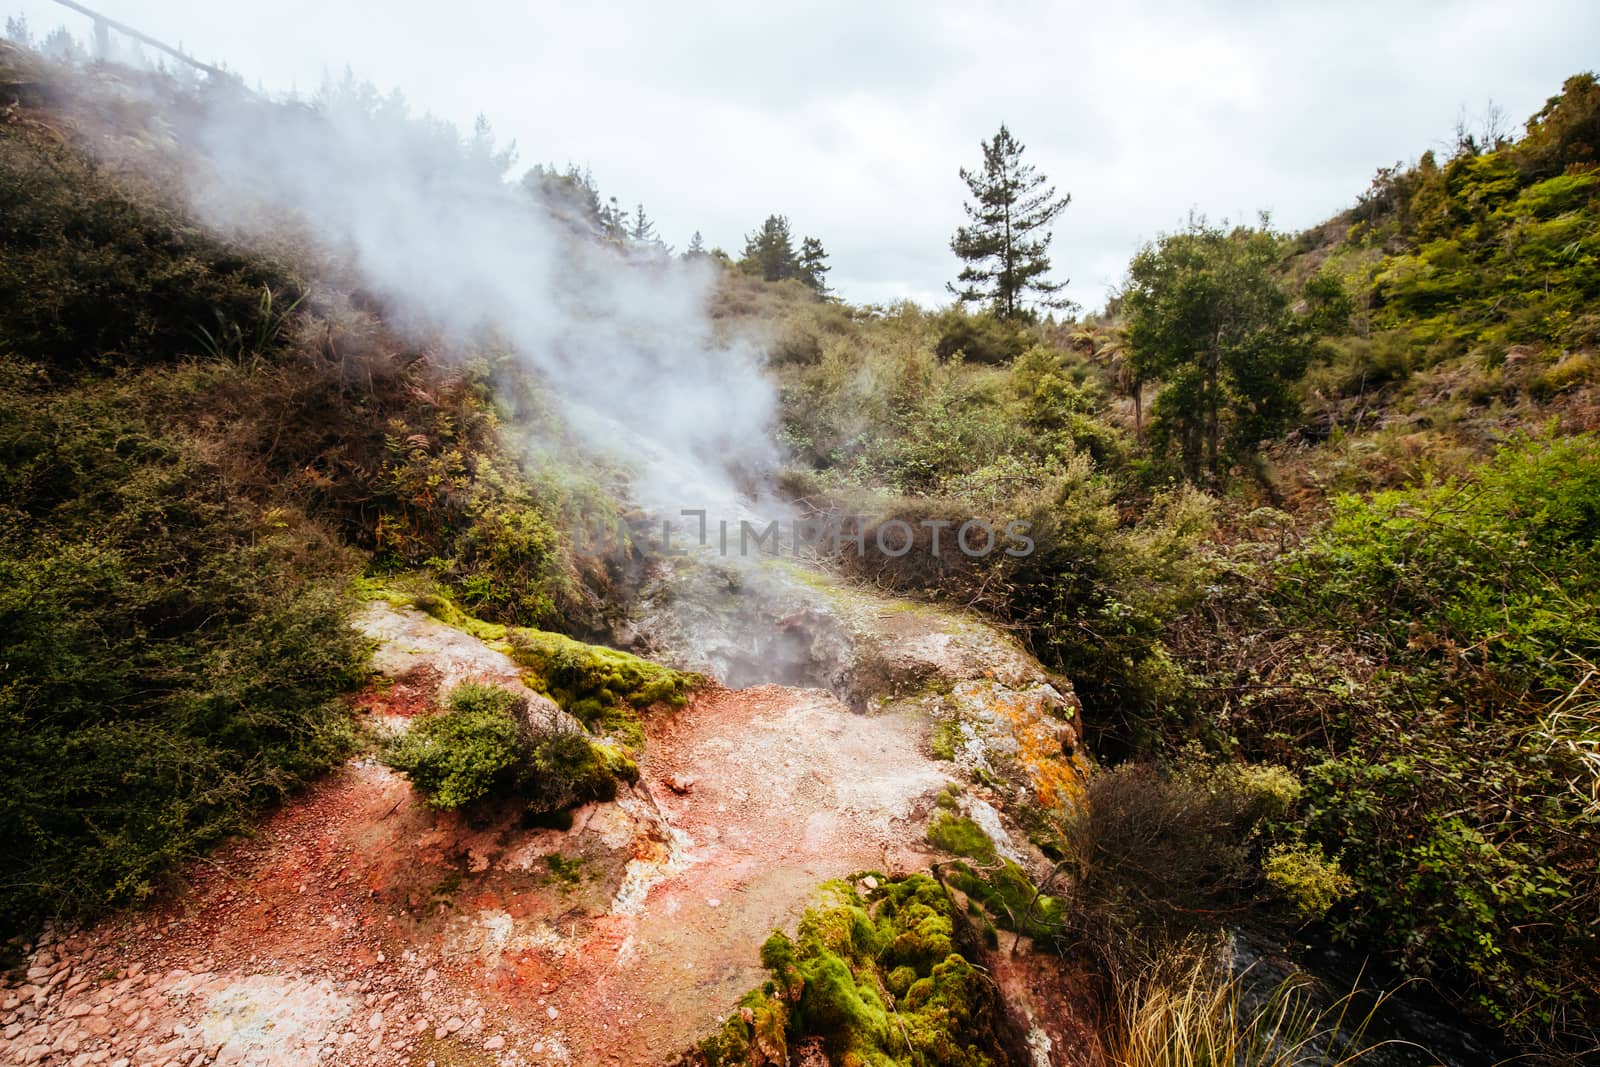 The volcanic and fascinating landscape of Wairakei Natural Thermal Valley near Taupo in New Zealand